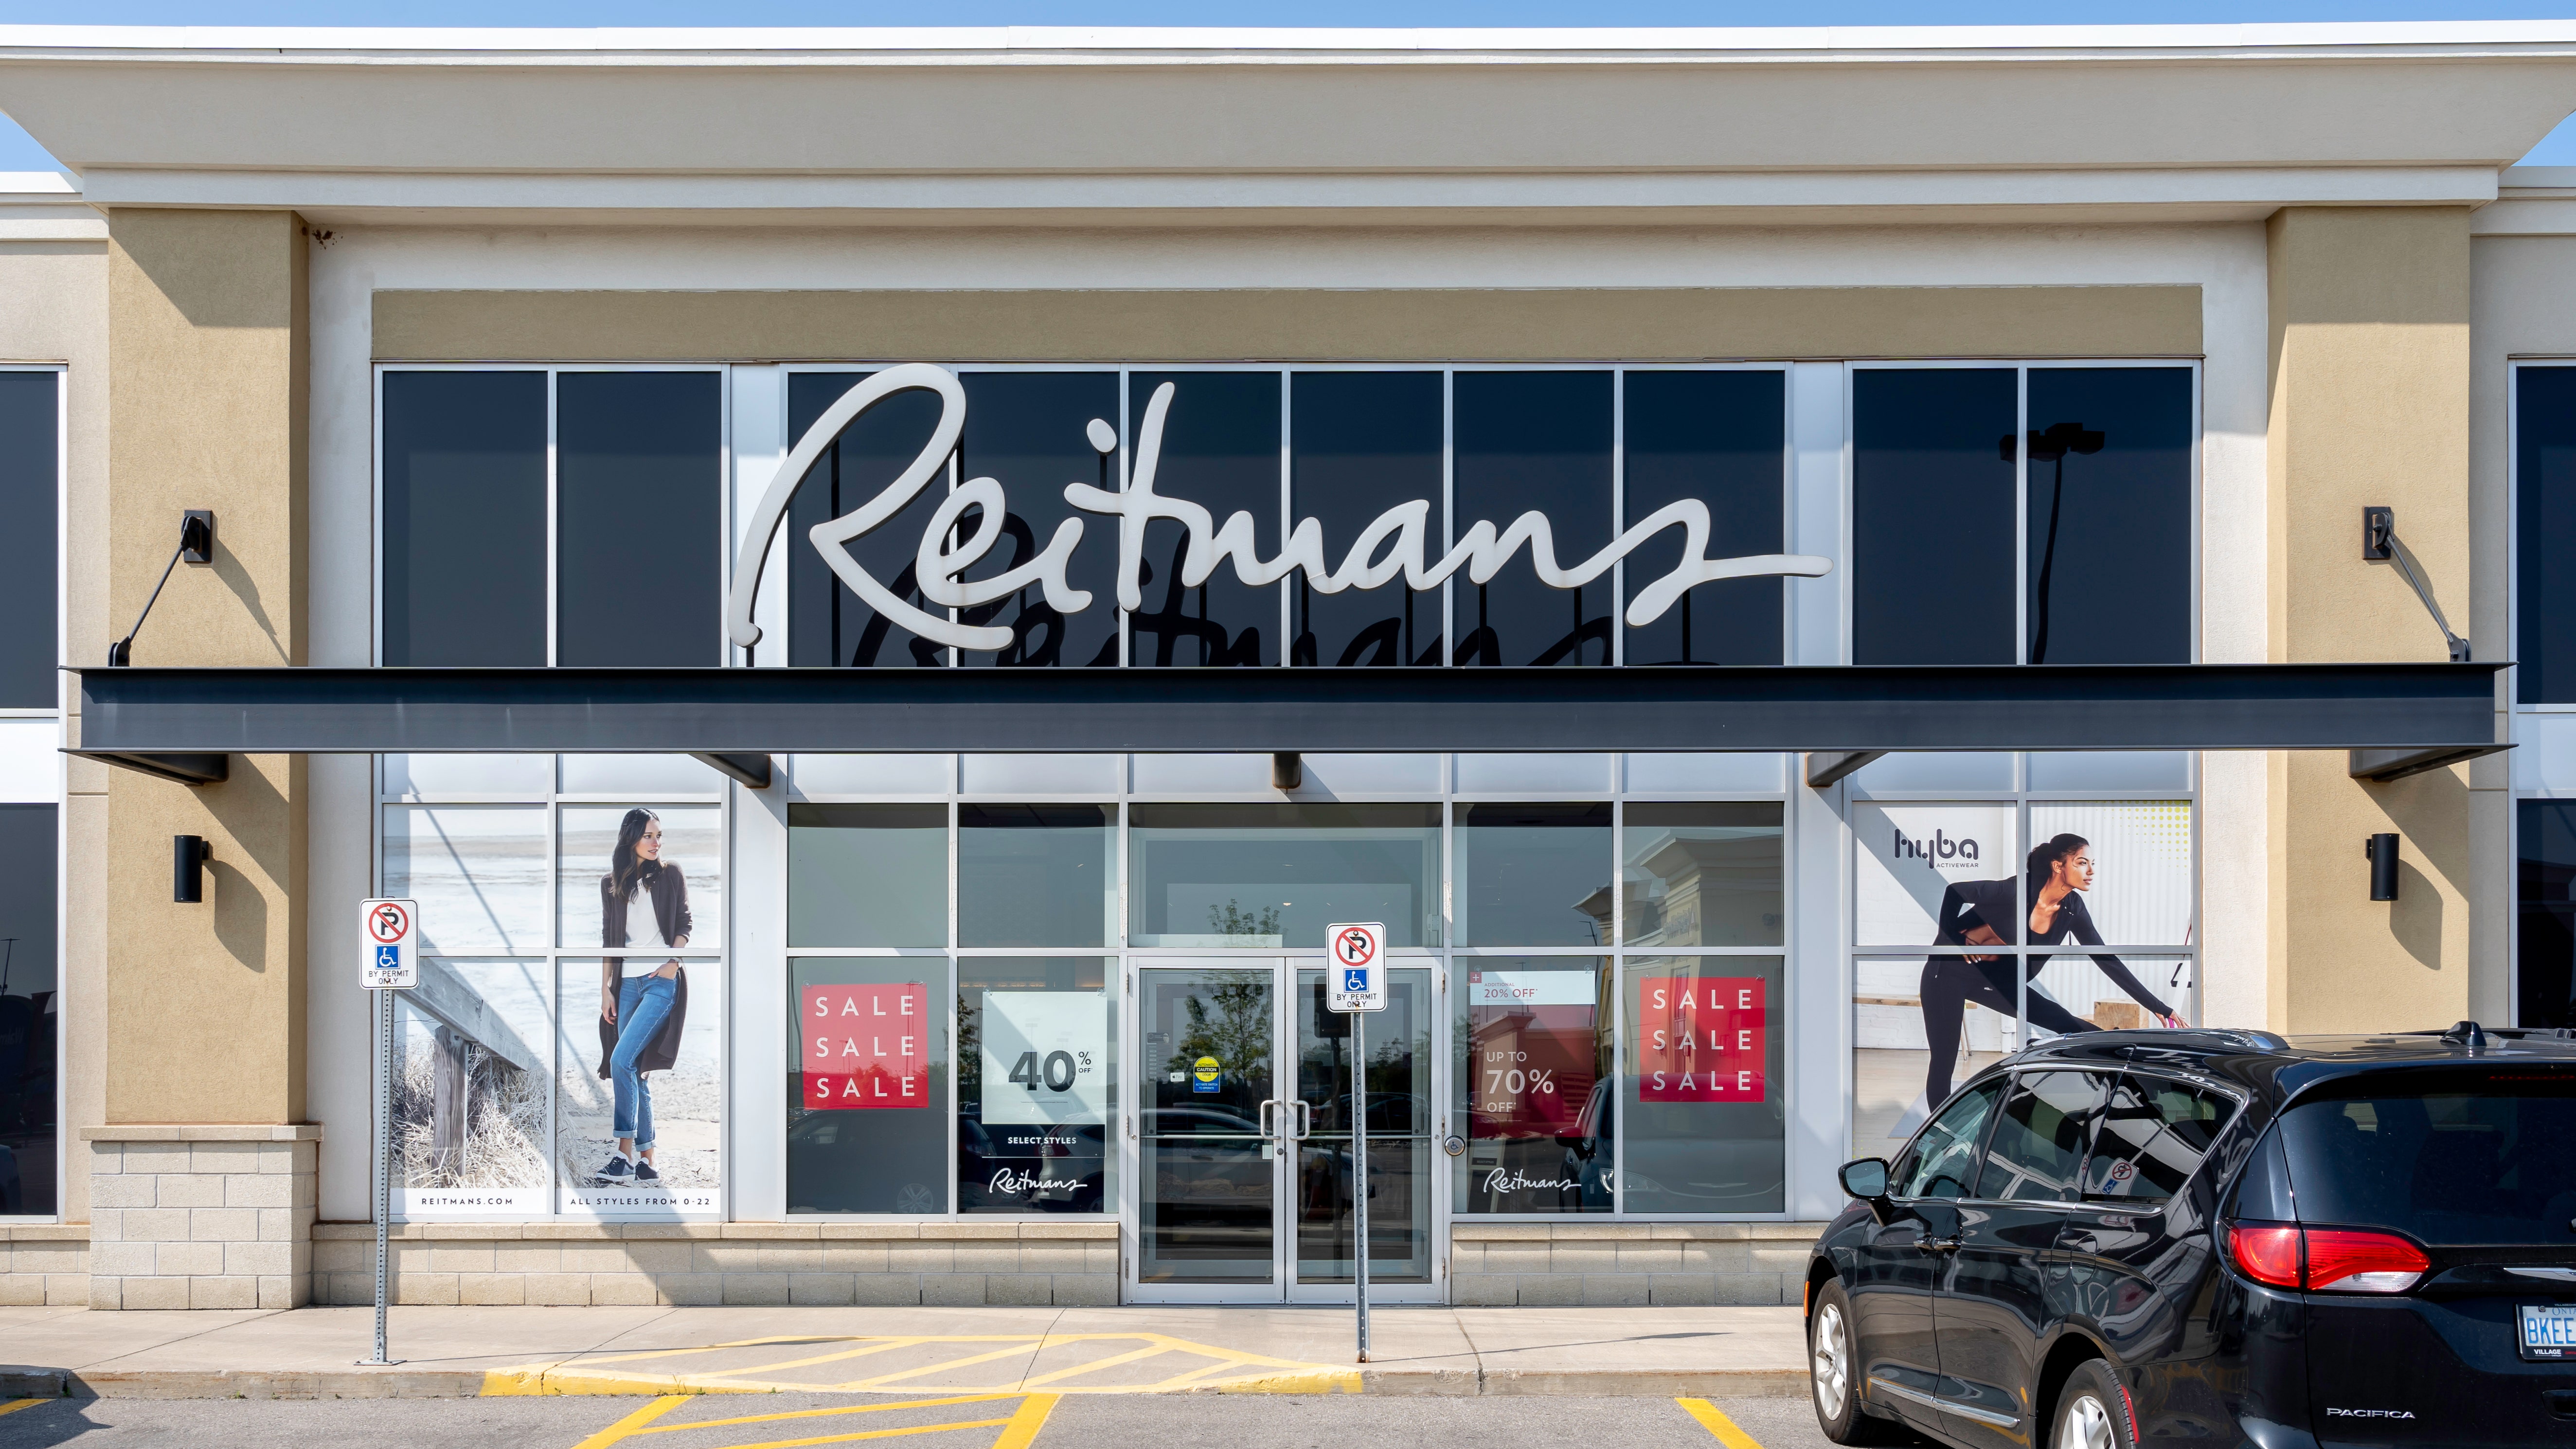 REITMANS (CANADA) LIMITED TO LAUNCH RCL MARKET THIS FALL